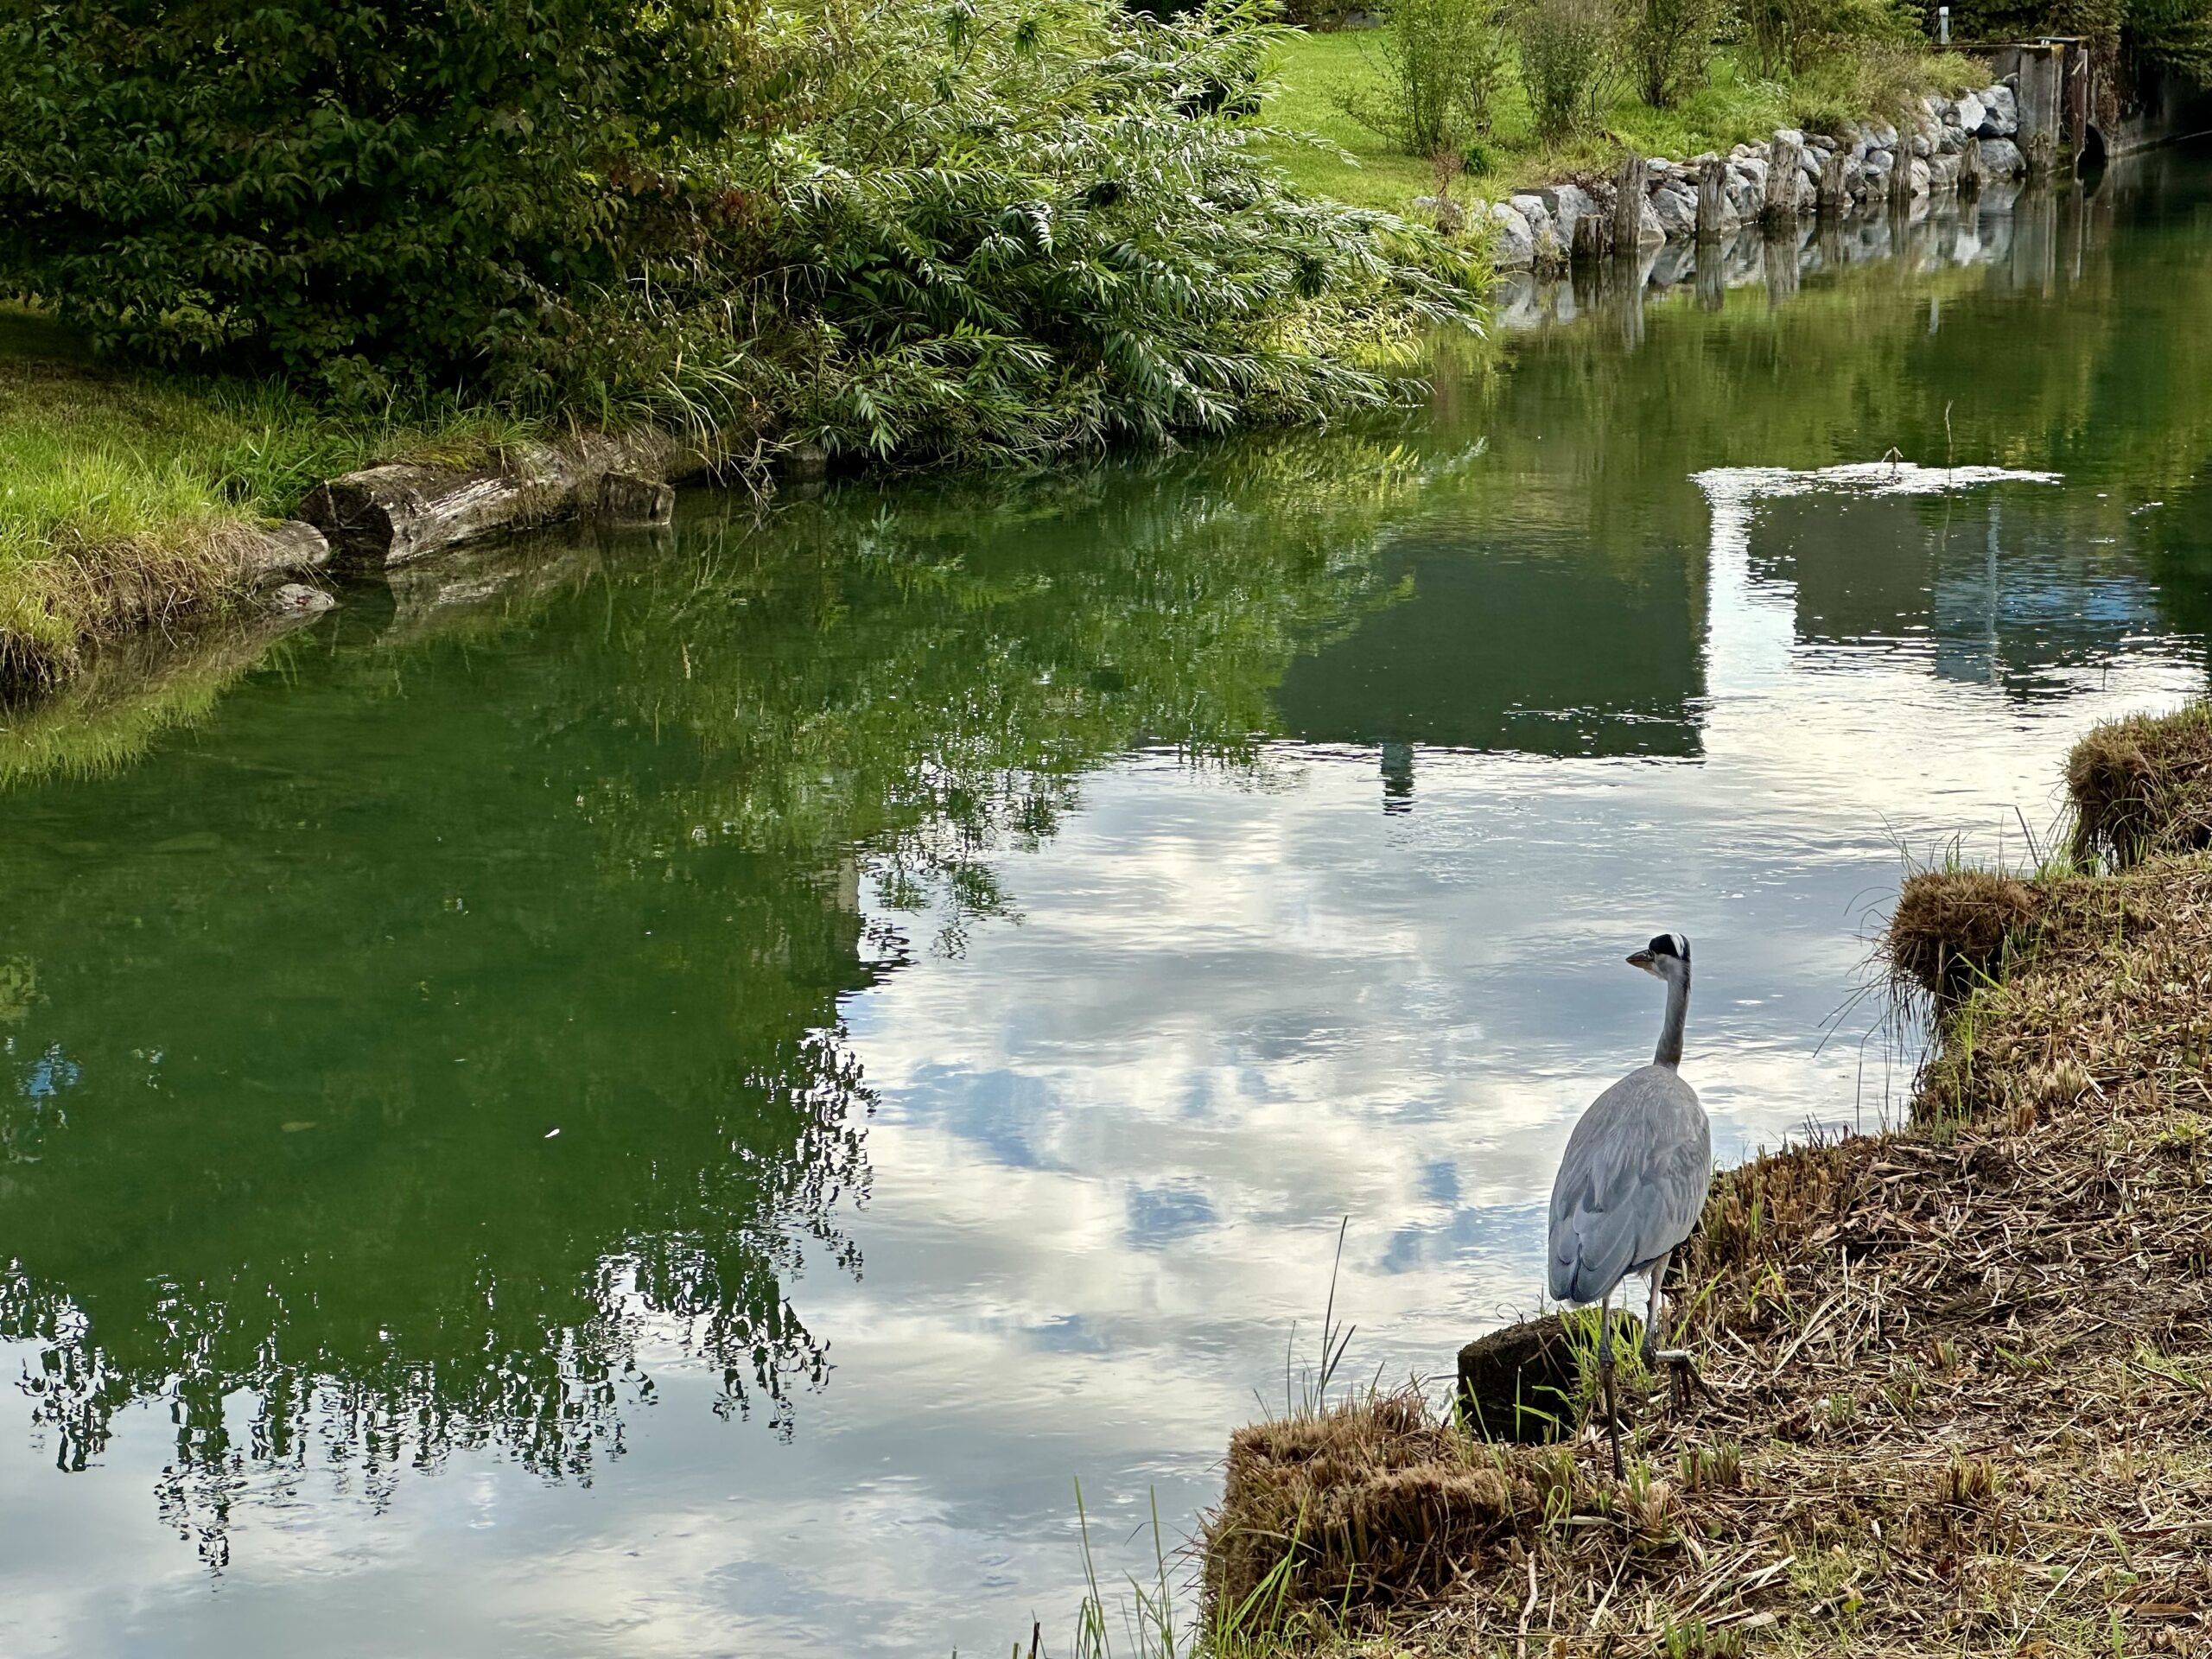 A great blue heron stalks prey along the near bank of a canal. The water looks green due to the reflection of grass and greenery on the far bank.